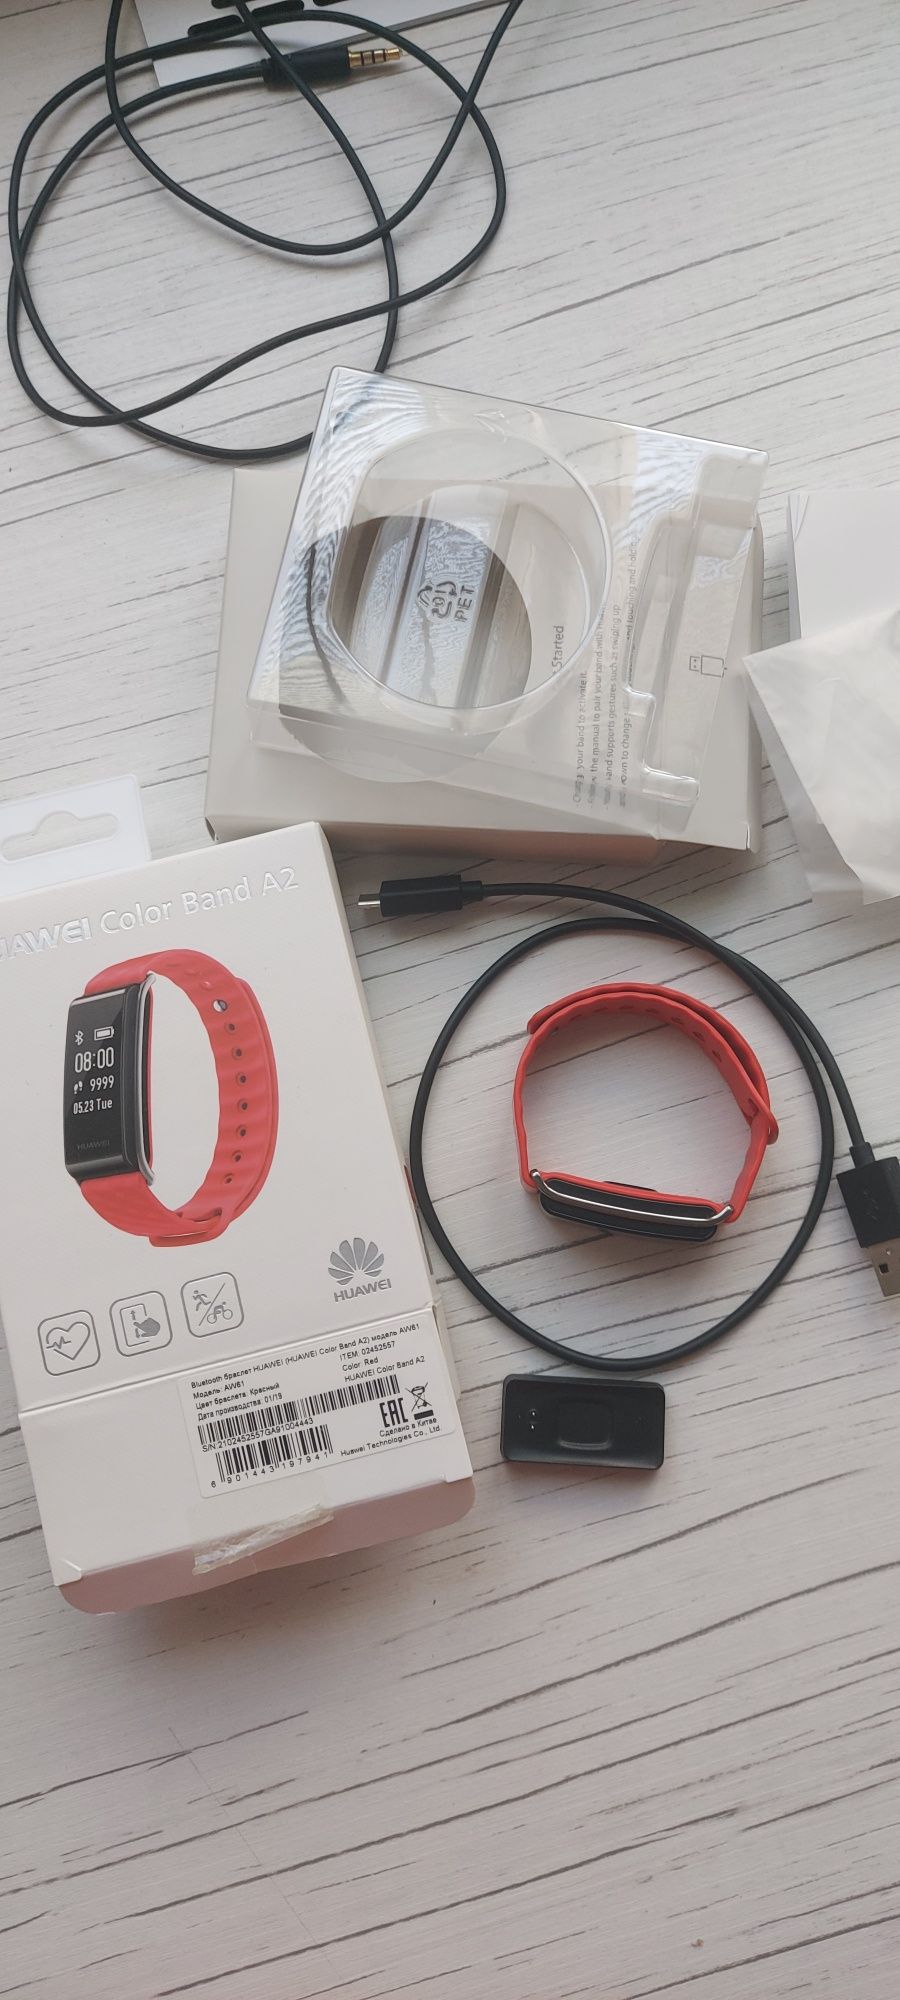 Huawei color Band A2